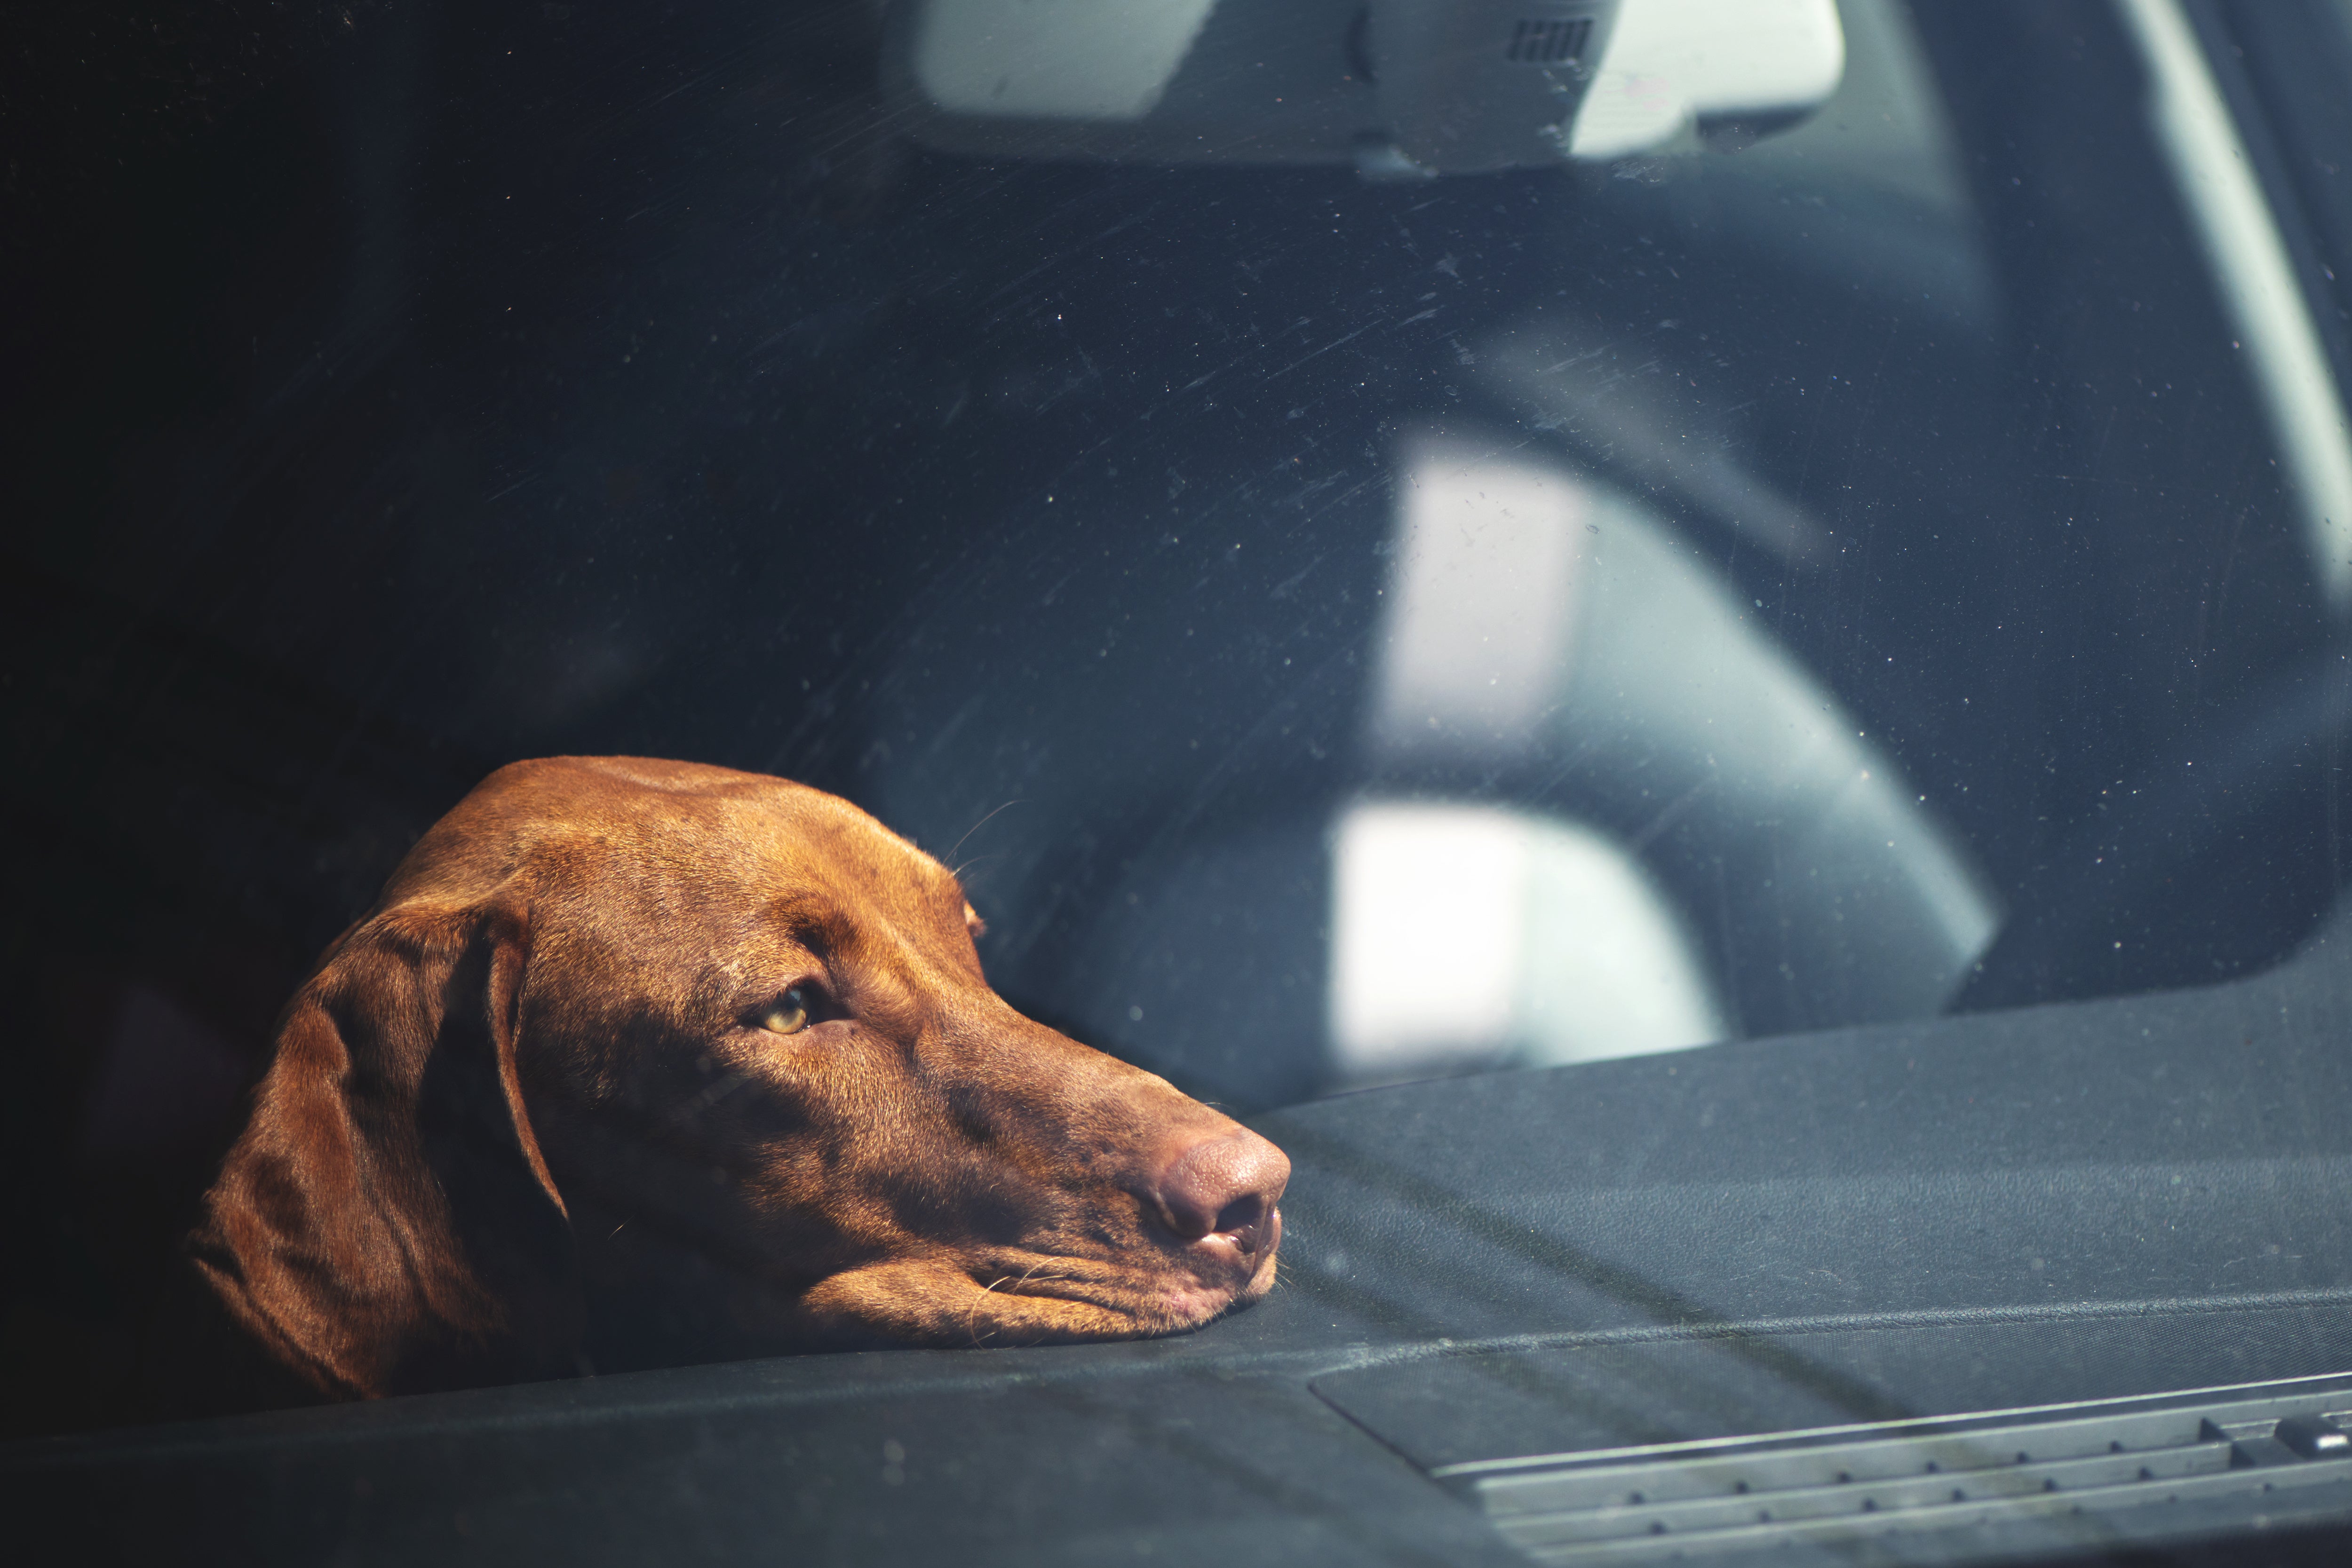 how do you know if your dog gets car sick